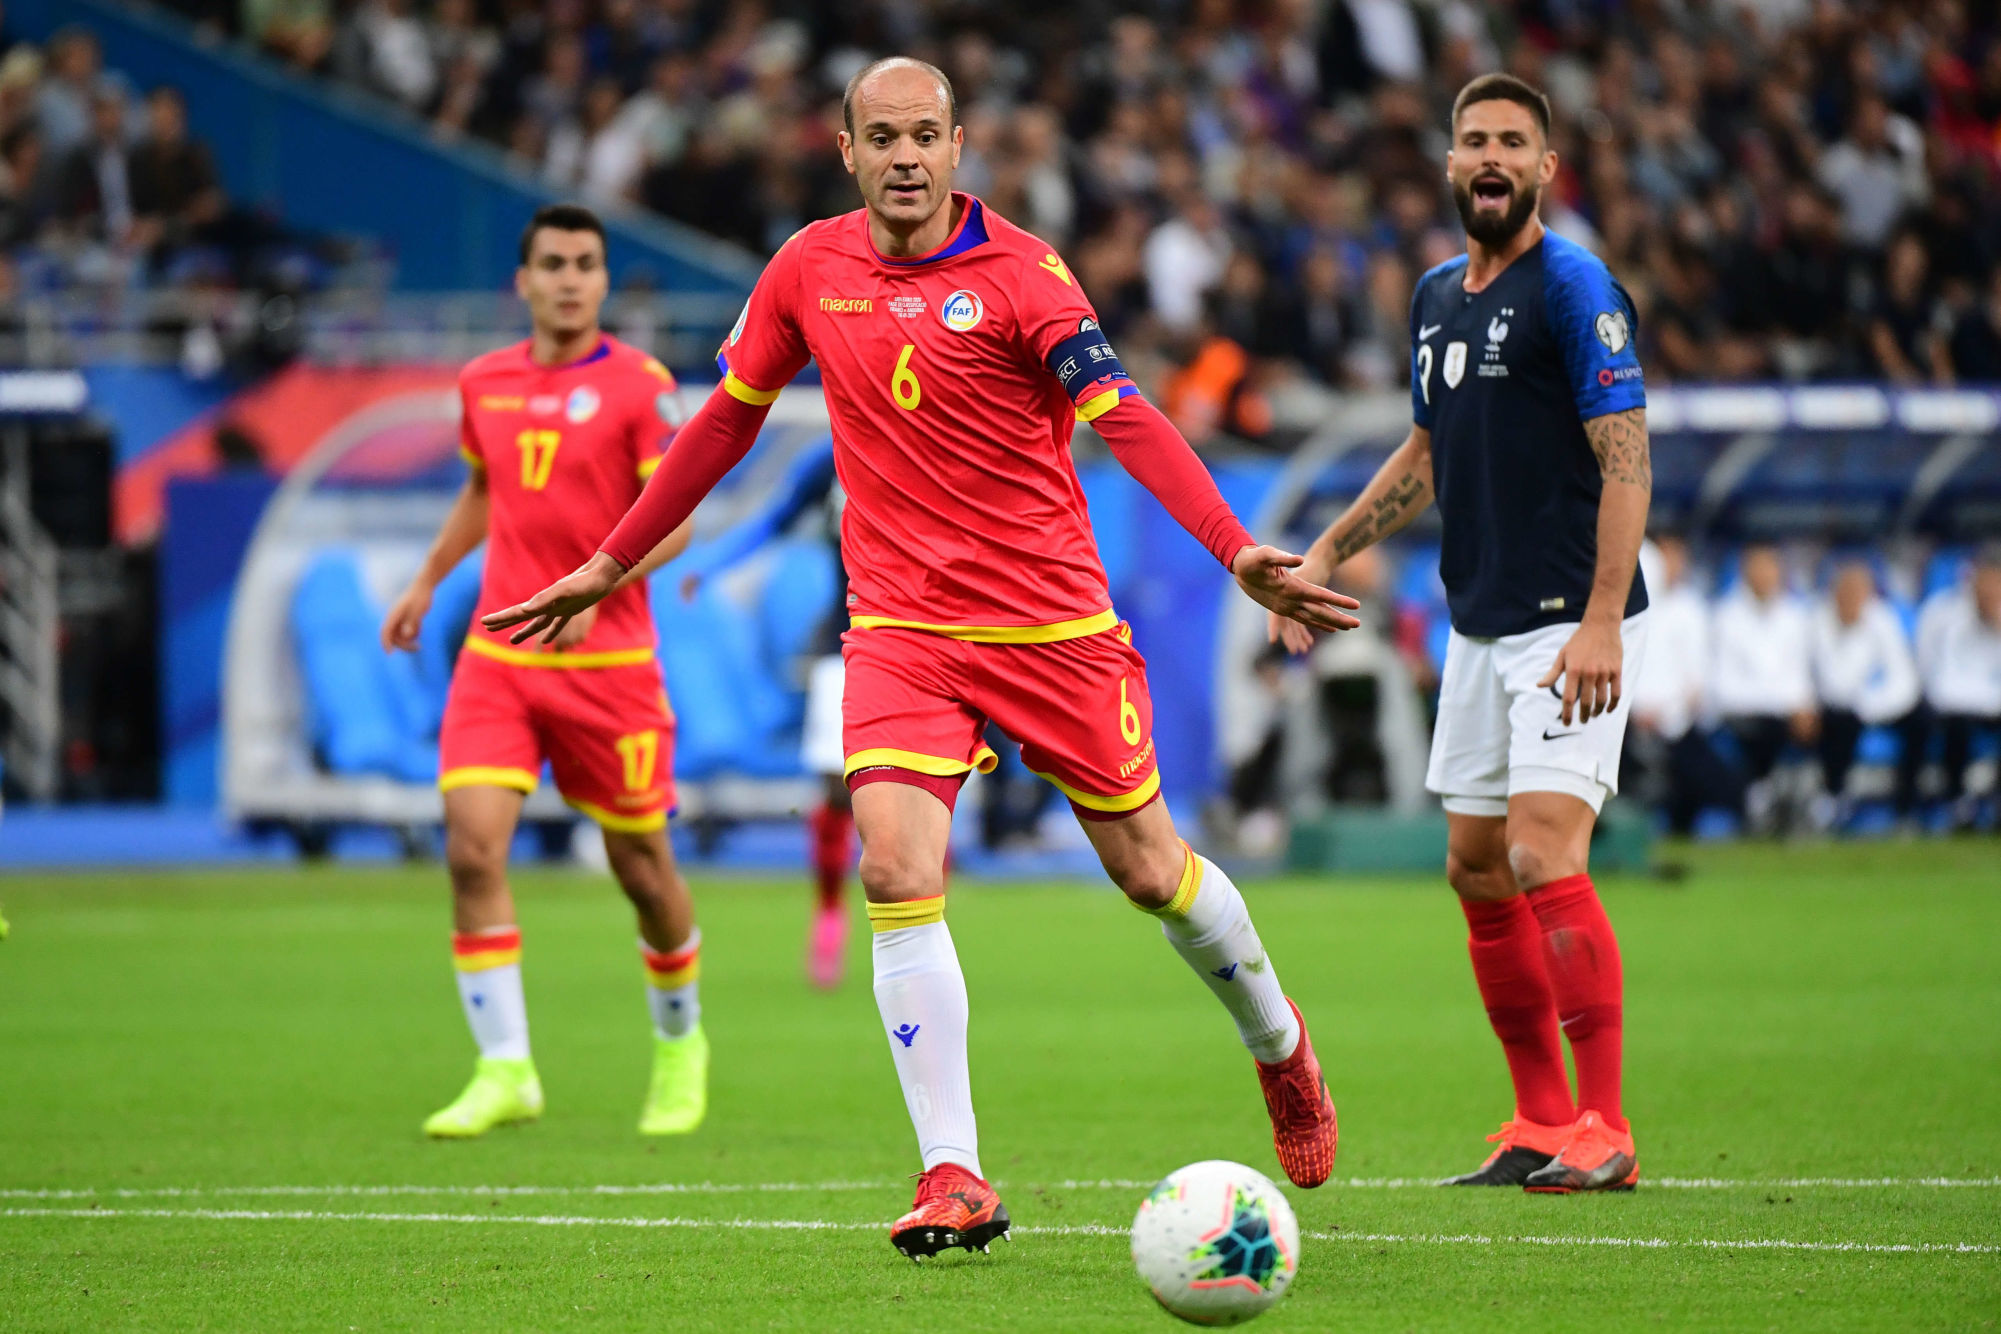 Ildefons Lima of Andorra during the UEFA European Championship 2020 qualifying match between France and Andorra at Stade de France on September 10, 2019 in Paris, France. (Photo by Dave Winter/Icon Sport) - Ildefons LIMA